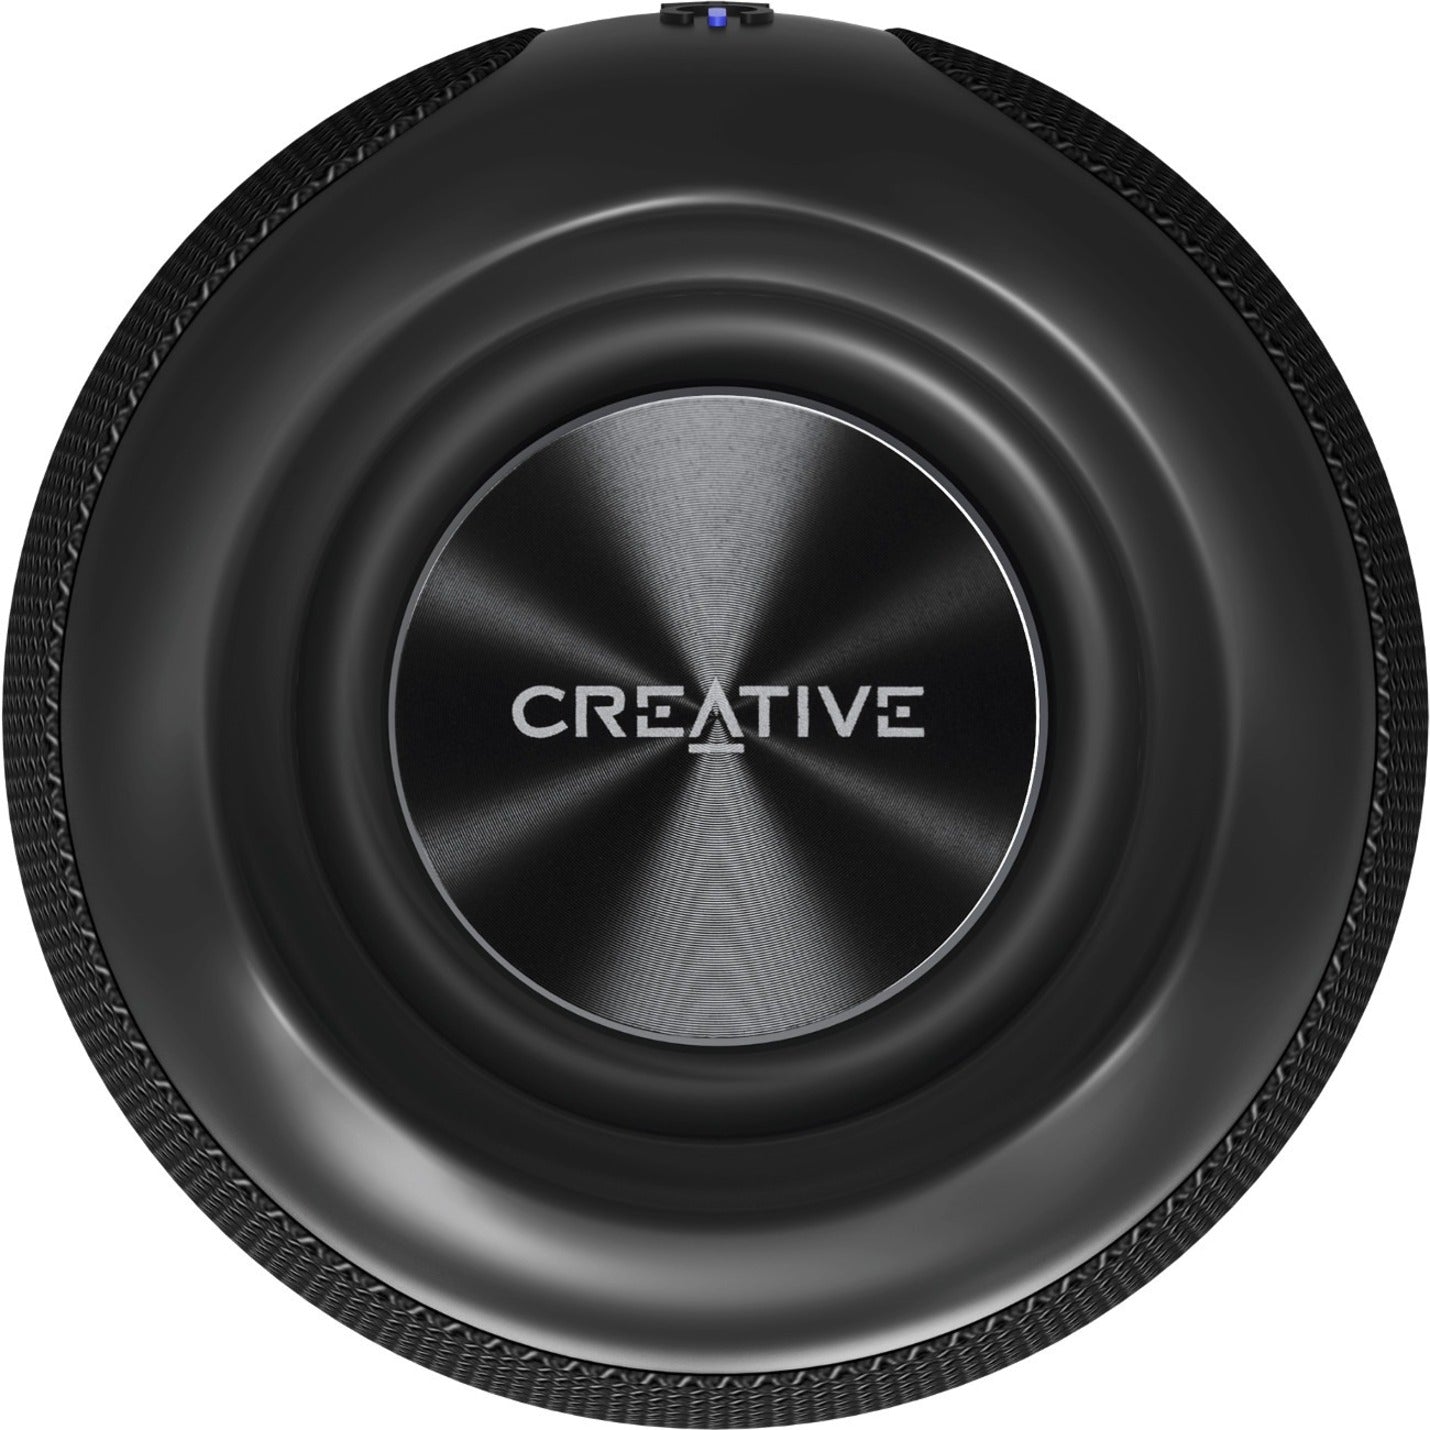 Creative 51MF8365AA000 MUVO Play Portable Bluetooth Smart Speaker, Siri and Google Assistant Supported, Black